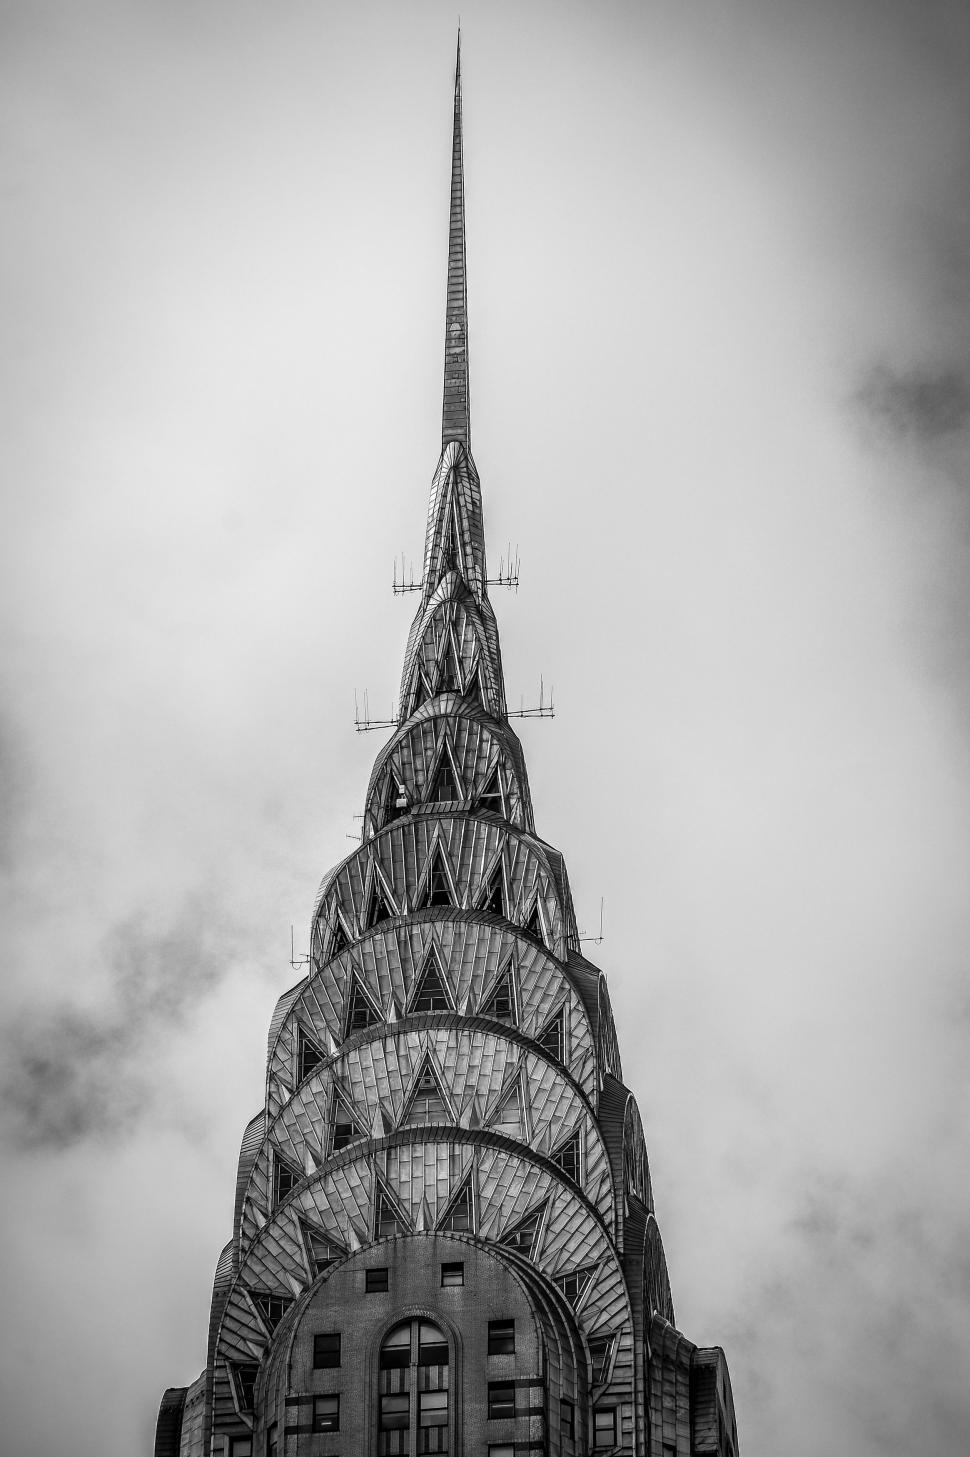 Free Image of Tall Building With Tall Spire 